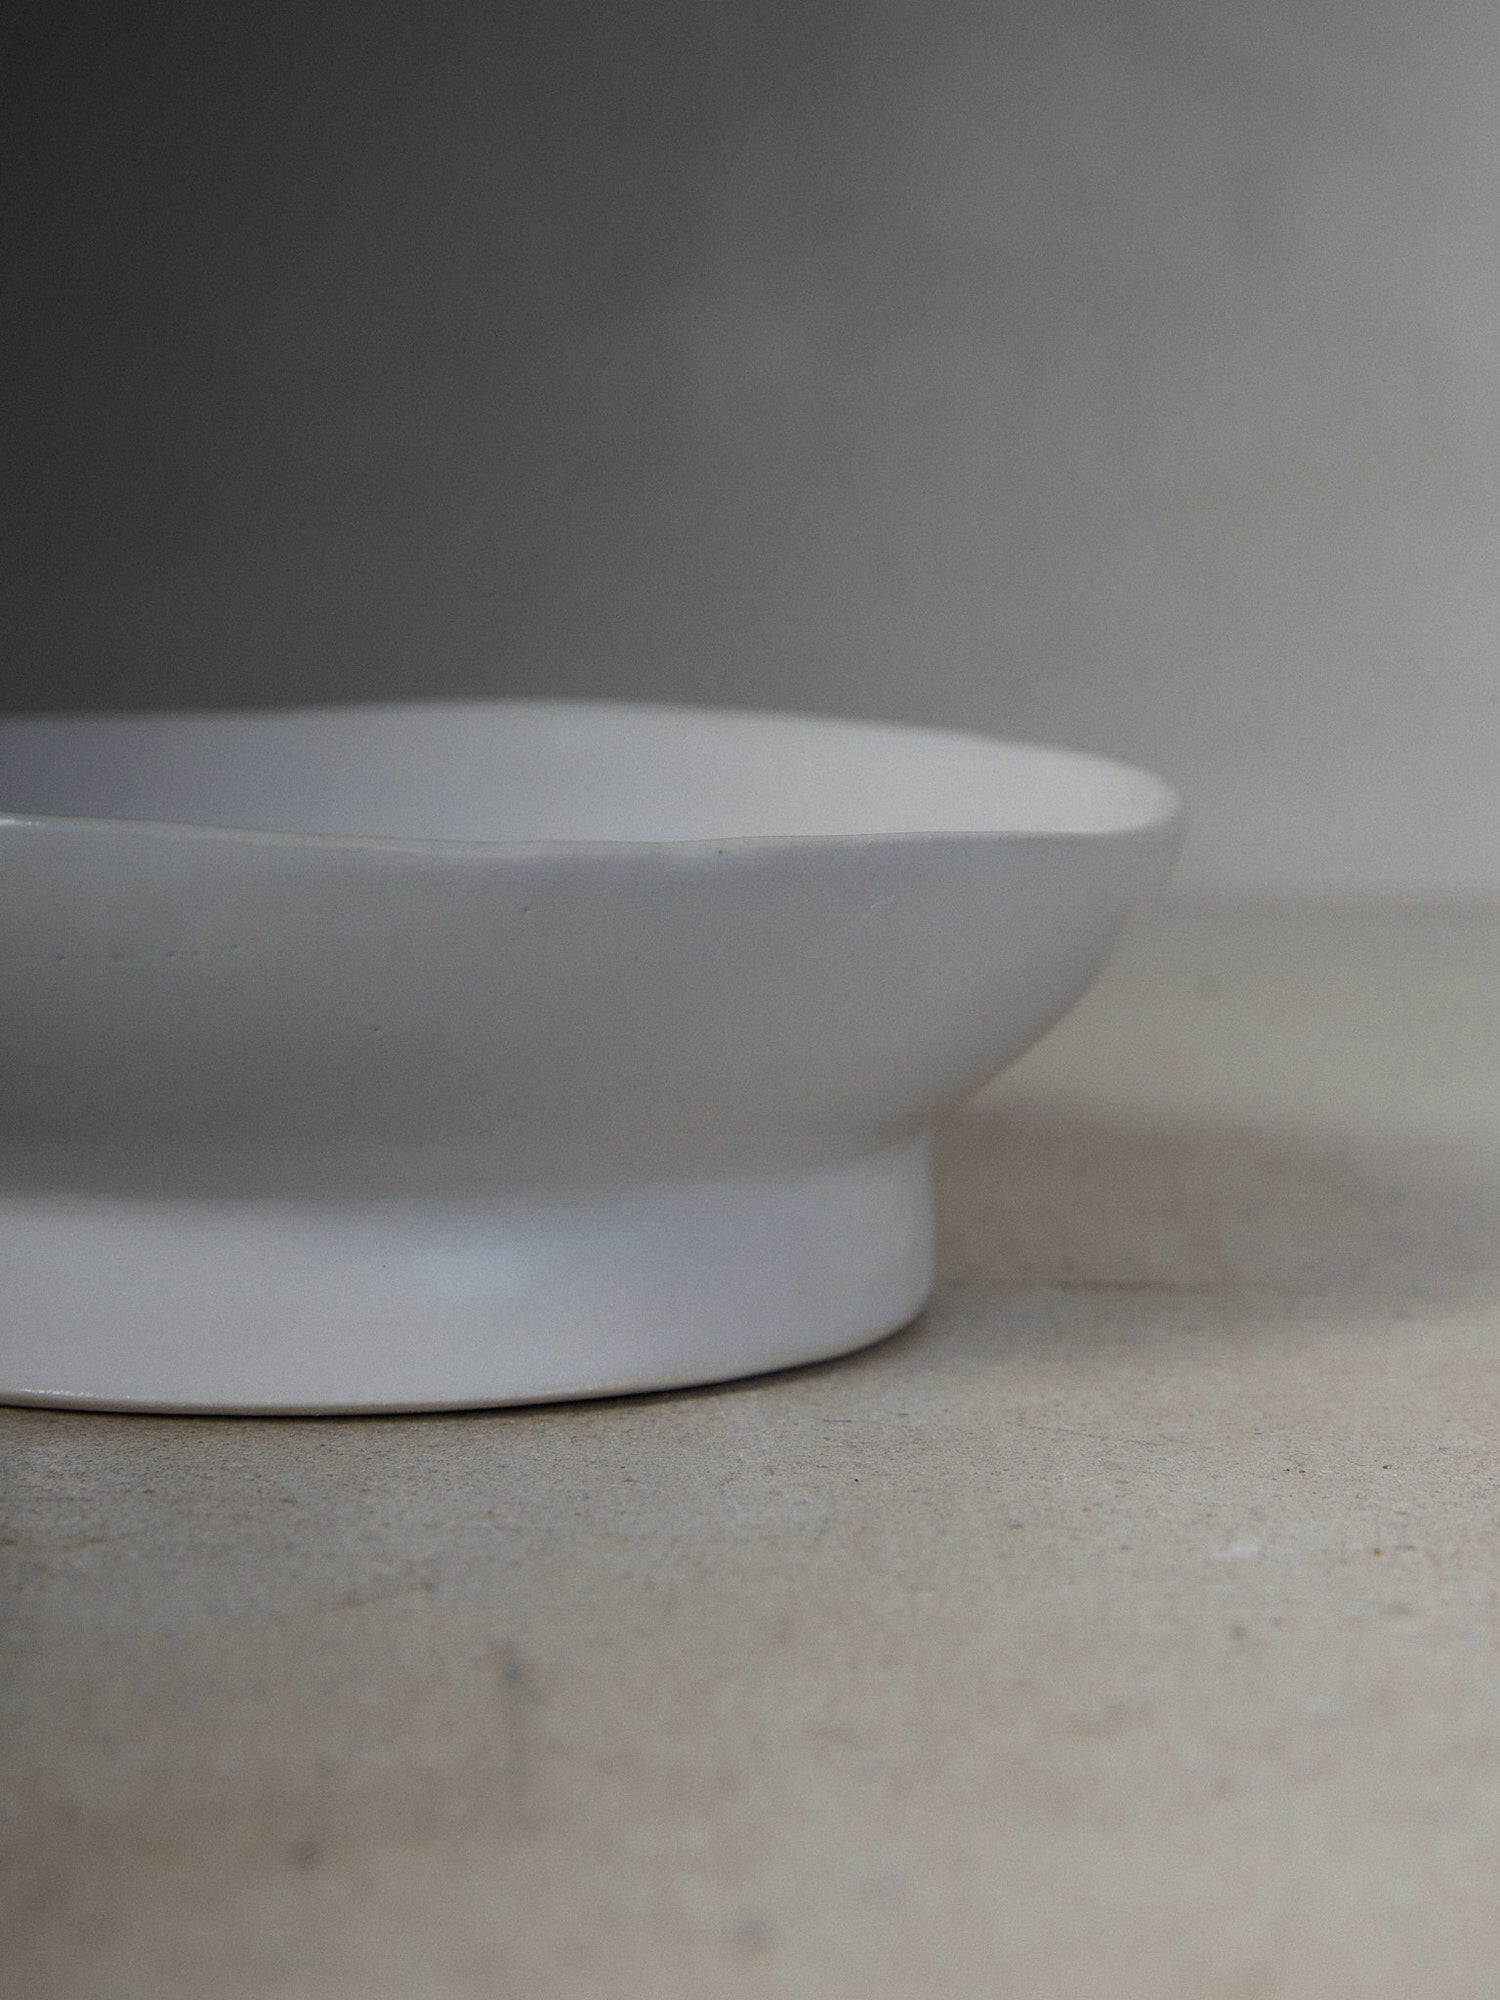 Raw Small Footed Platter. A hand-formed rimmed platter recalling the natural world with perfectly imperfect edges atop a solid, footed base in versatile matte white stoneware.